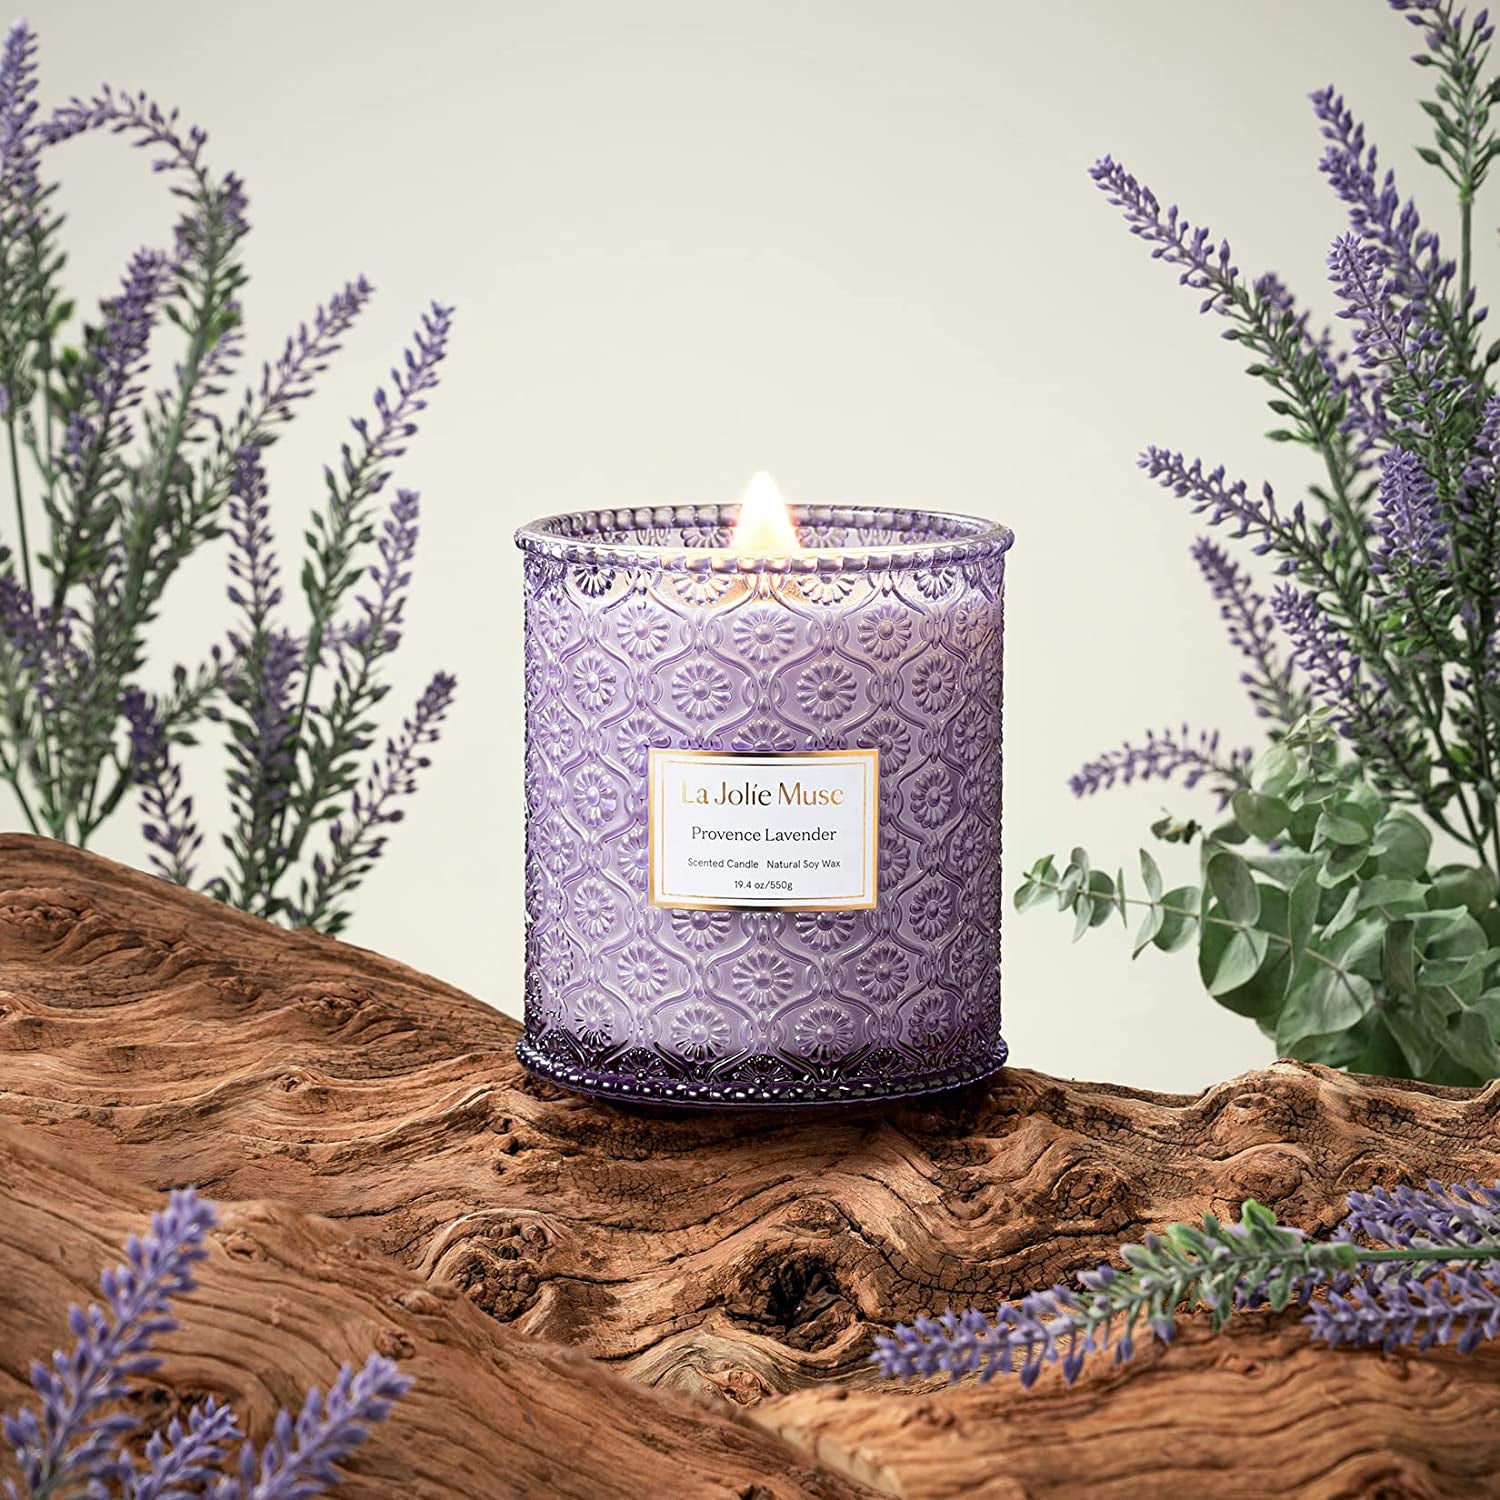 a lit lavender candle in a purple glass jar with lavender sprigs around it